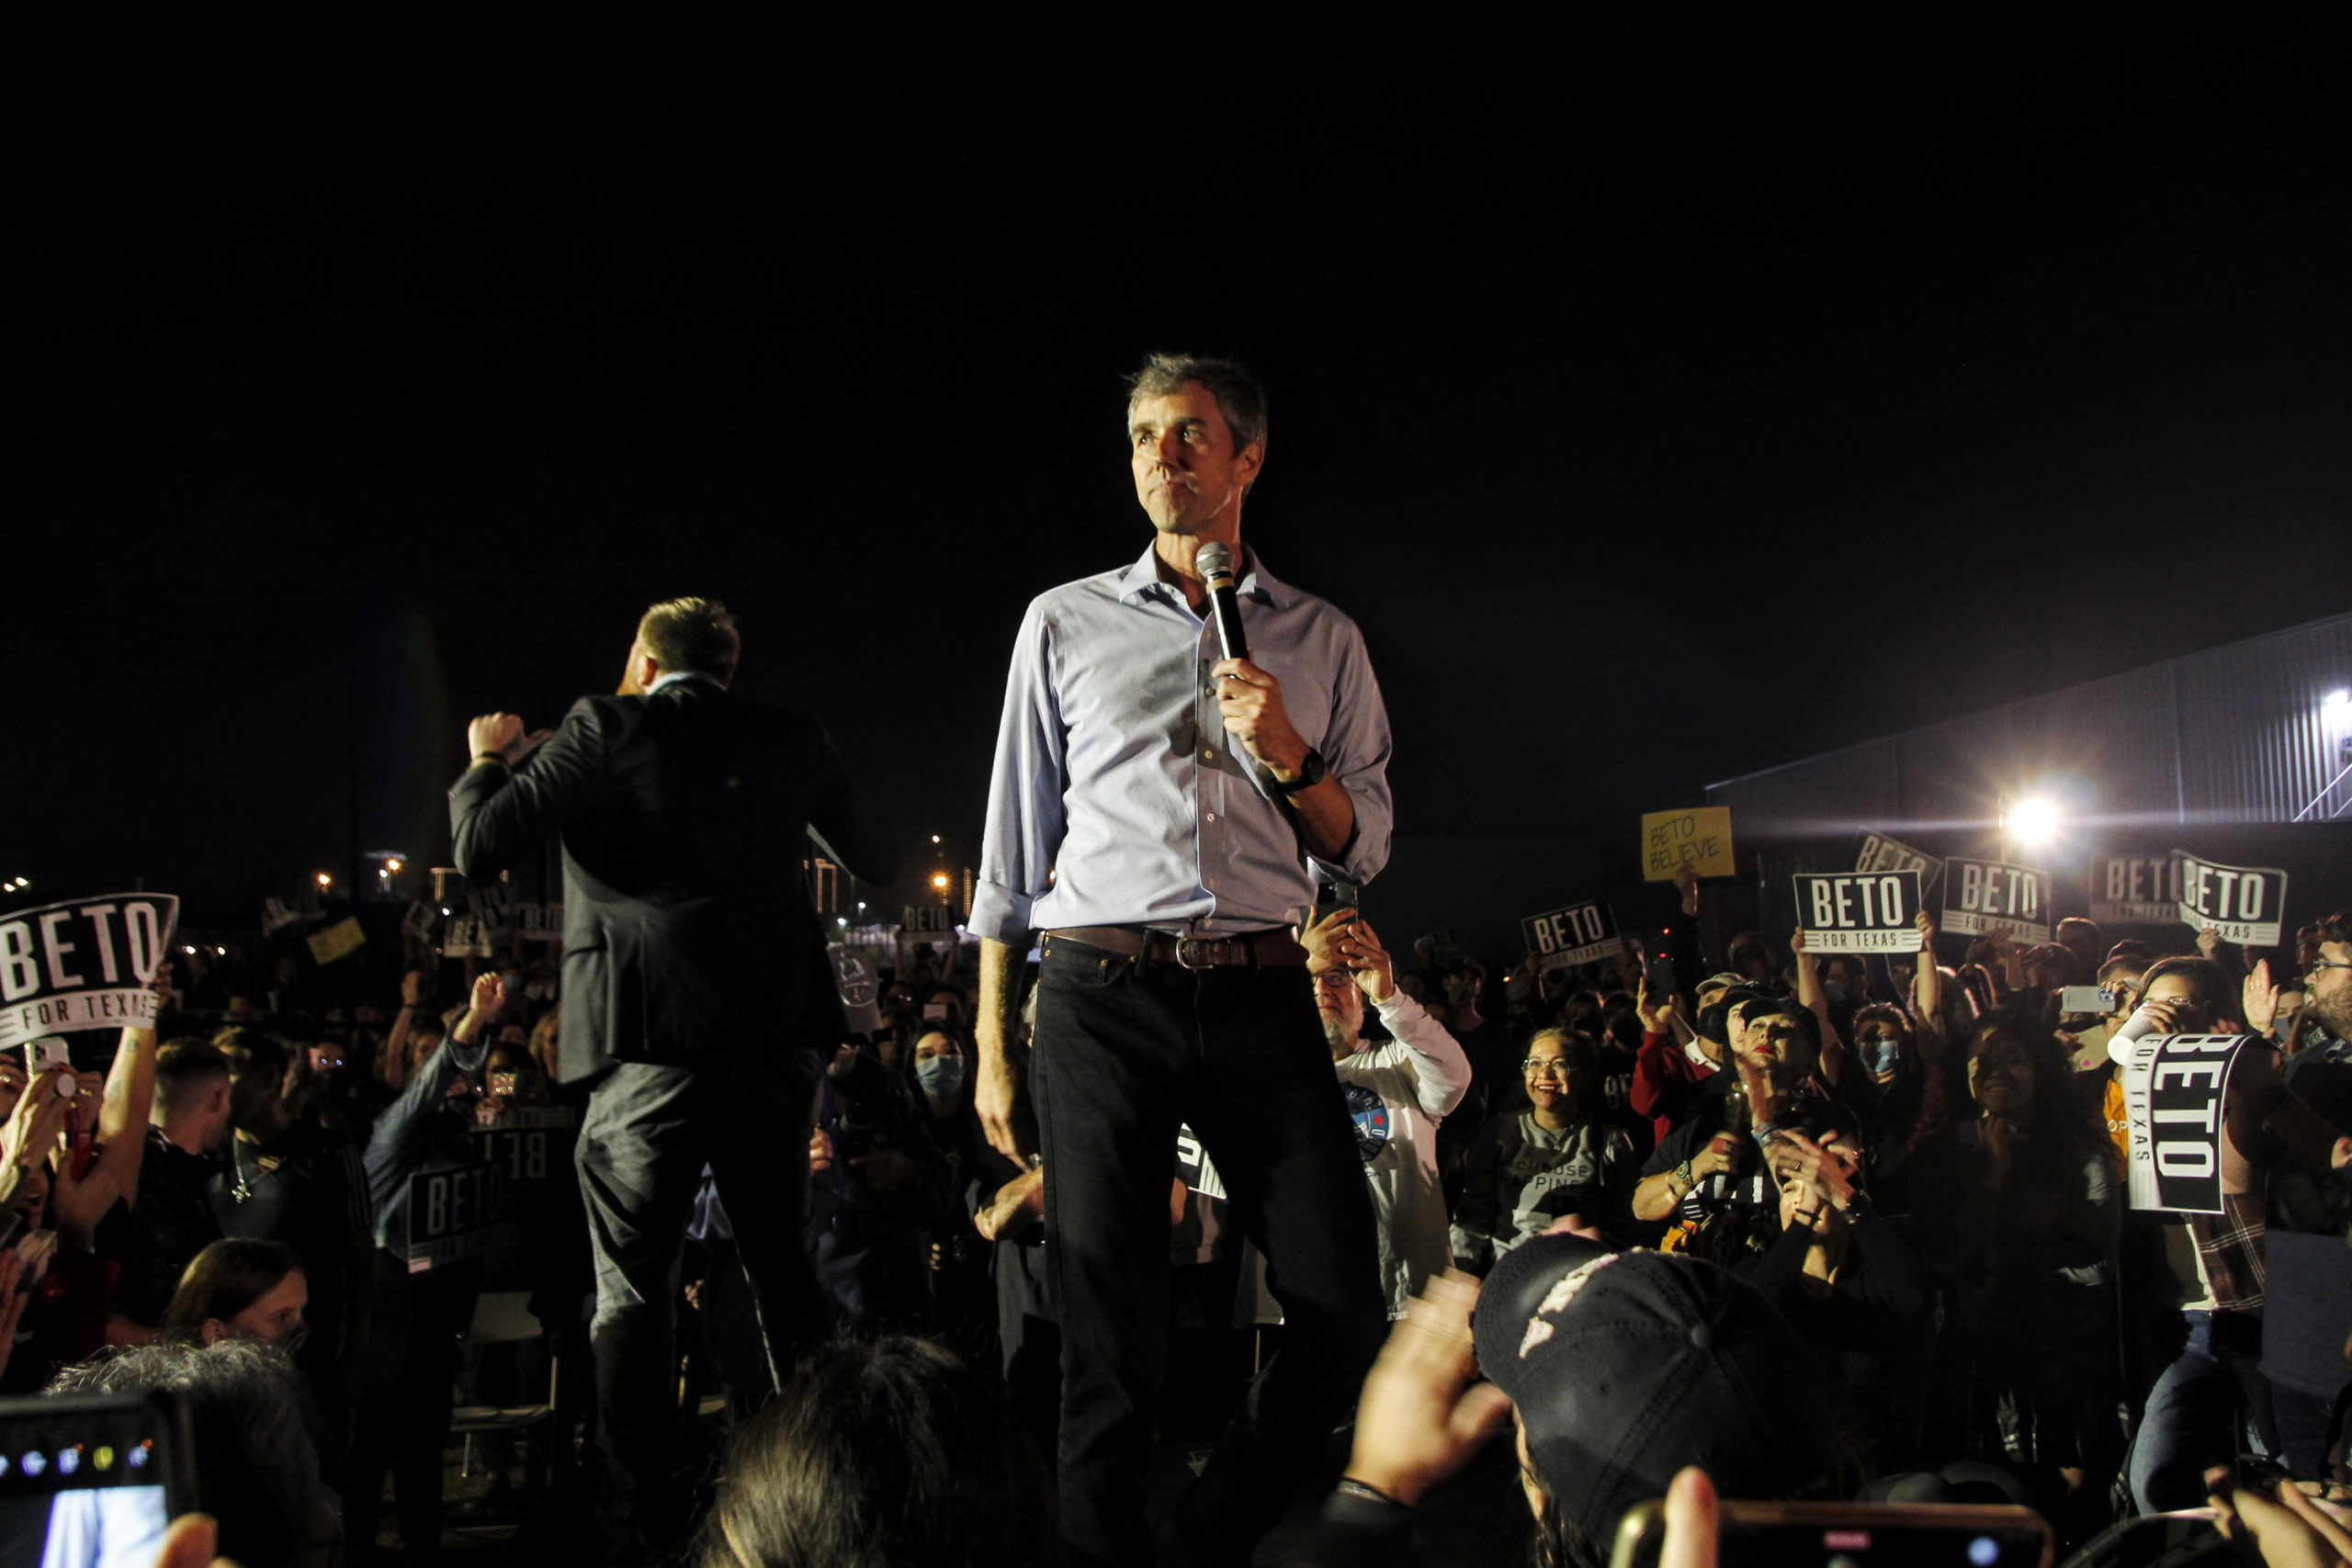 Beto O'Rourke stands confidently among a crowd in Fort Worth at night